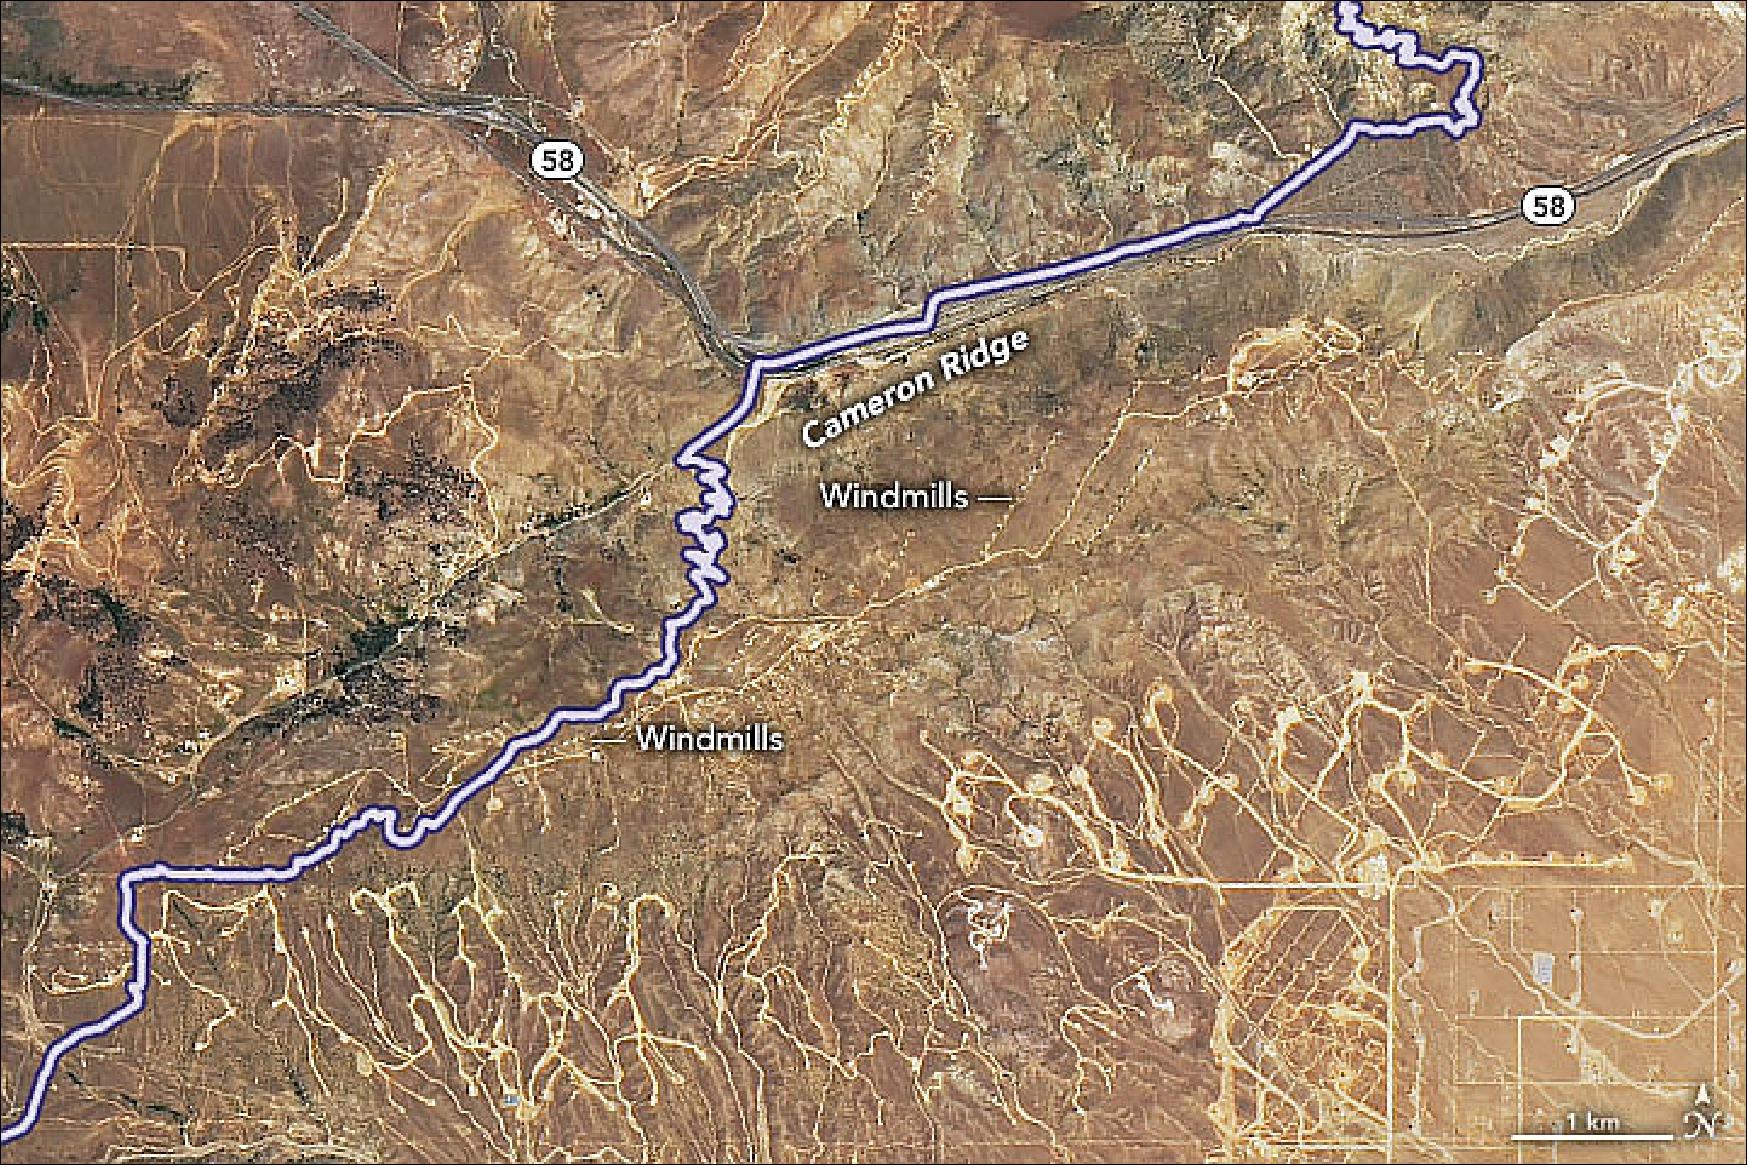 Figure 35: On 1 July 2019, the Operational Land Imager (OLI) on Landsat-8 acquired this image of Cameron Ridge where the PCT (purple) crosses Tehachapi Pass. The pass divides the Tehachapi Mountains (south) and the Sierra Nevada (north), and forms a narrow connection between the San Joaquin Valley and the Mojave Desert (image credit: NASA Earth Observatory, image by Joshua Stevens, using Landsat data from the U.S. Geological Survey. Story by Kathryn Hansen)